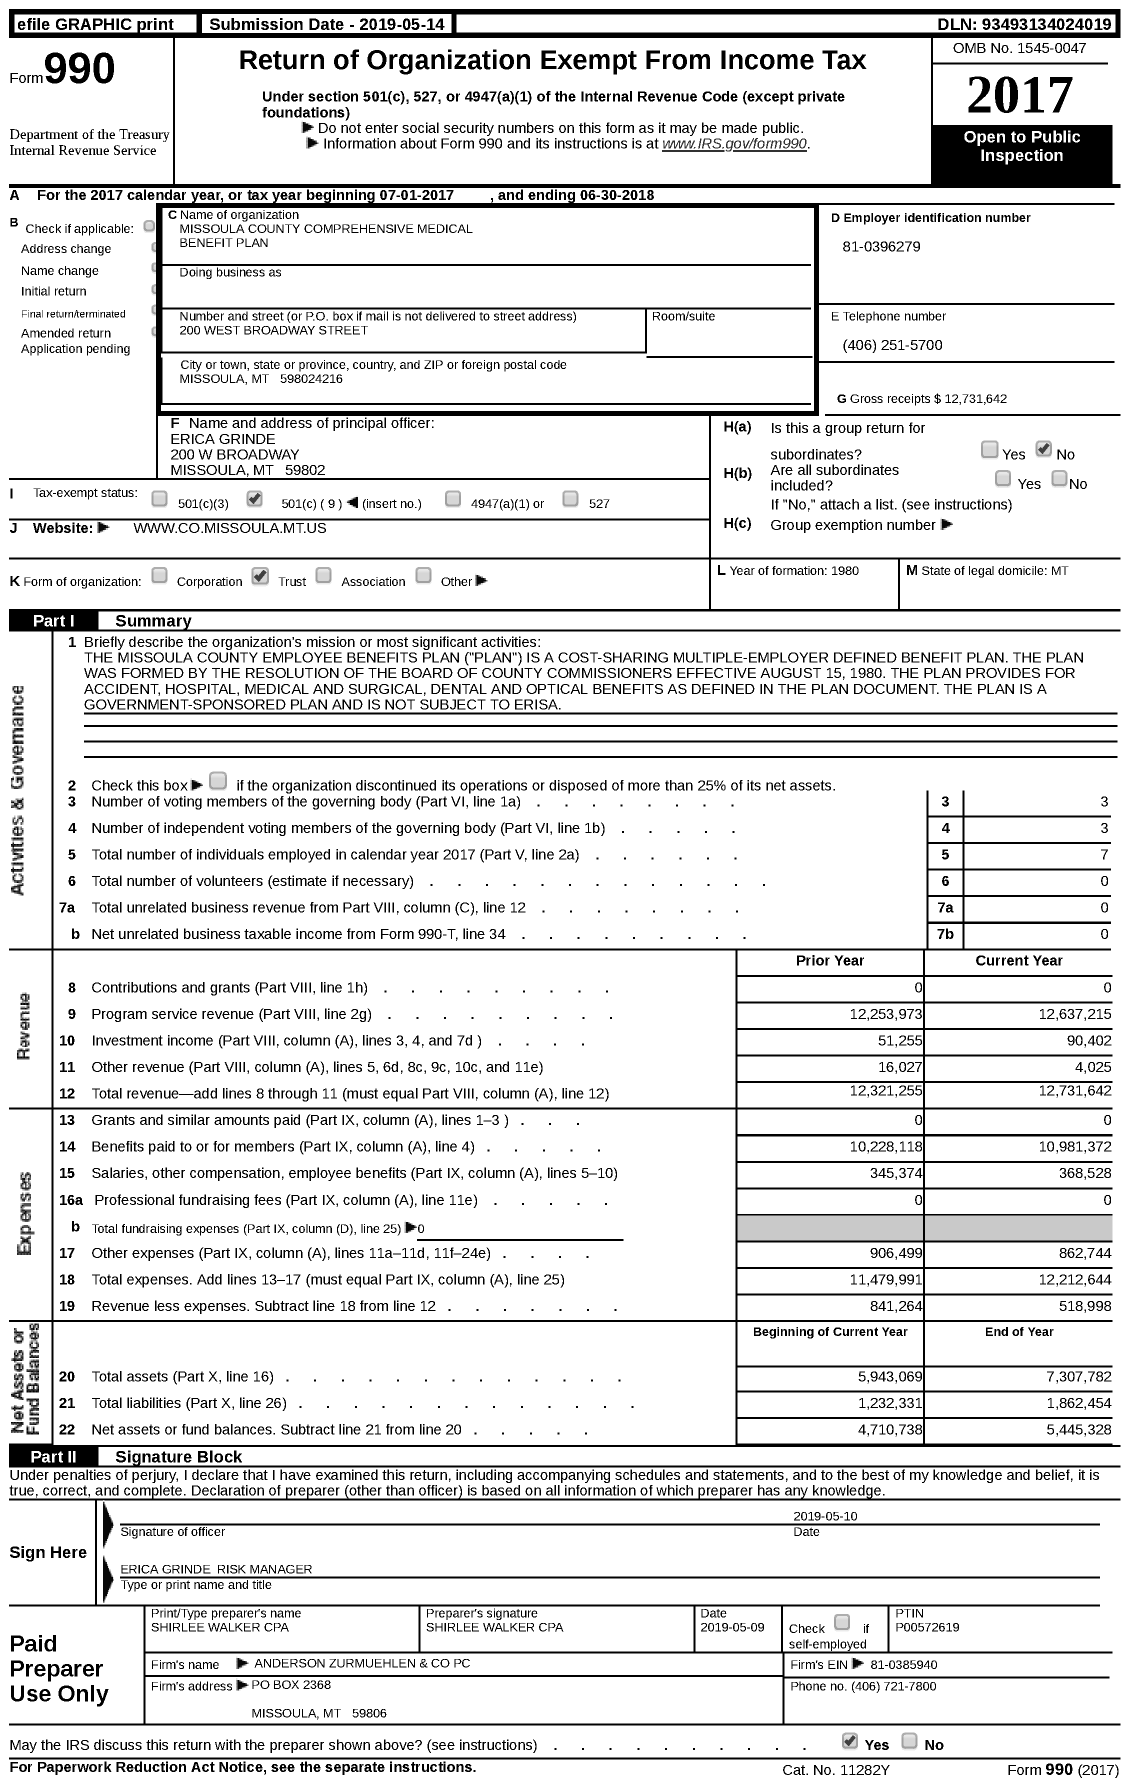 Image of first page of 2017 Form 990 for Missoula County Comprehensive Medical Benefit Plan